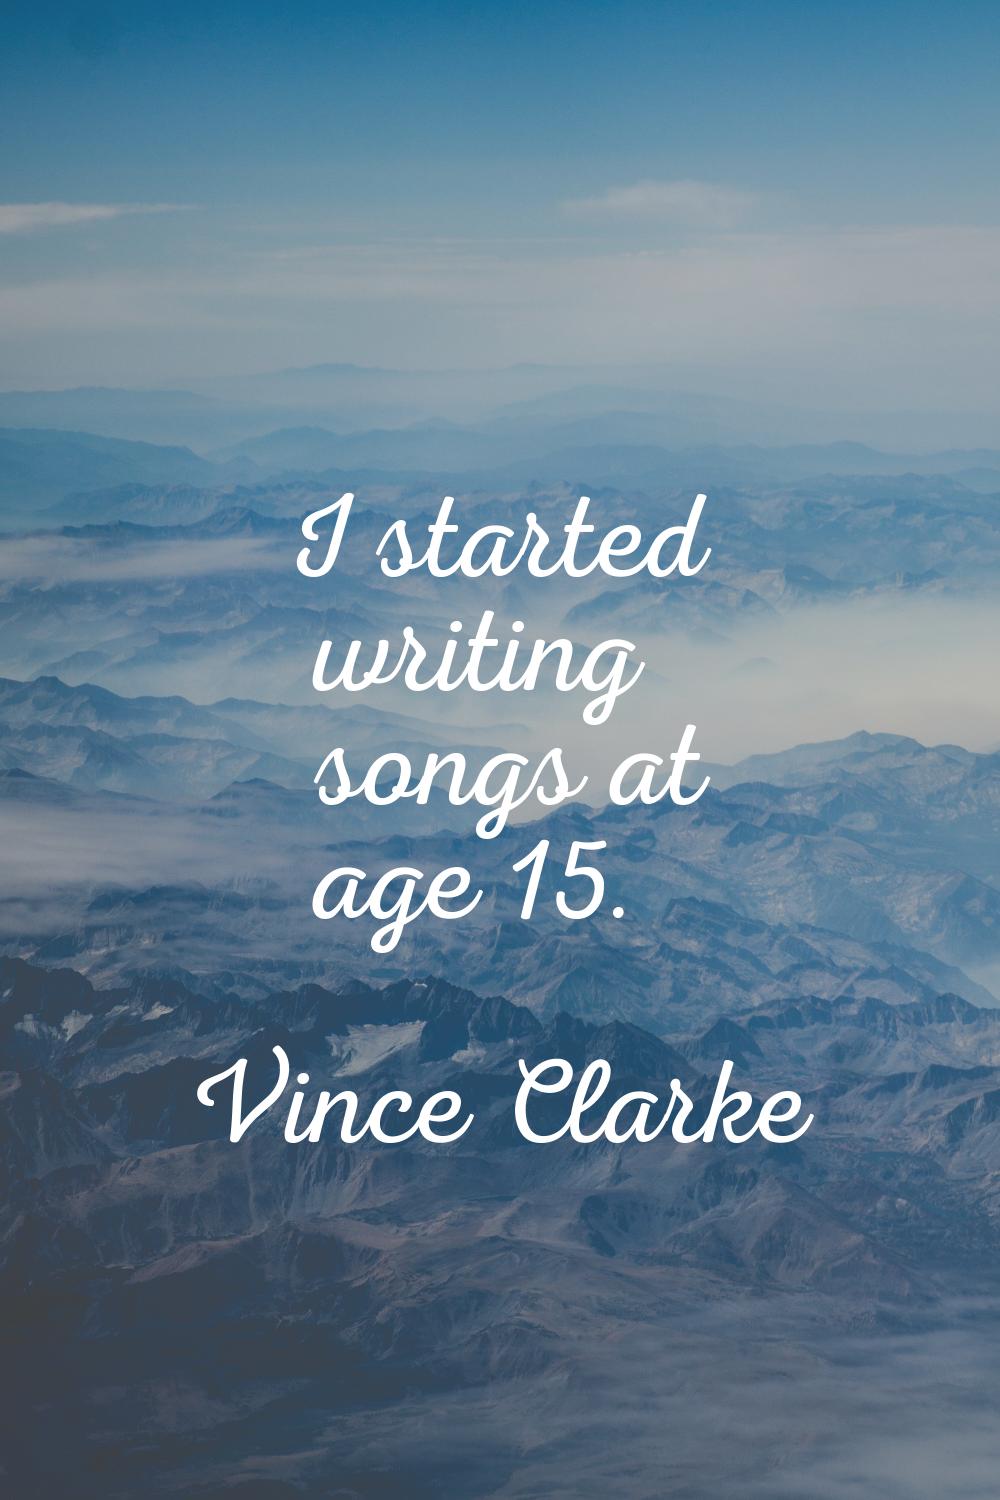 I started writing songs at age 15.